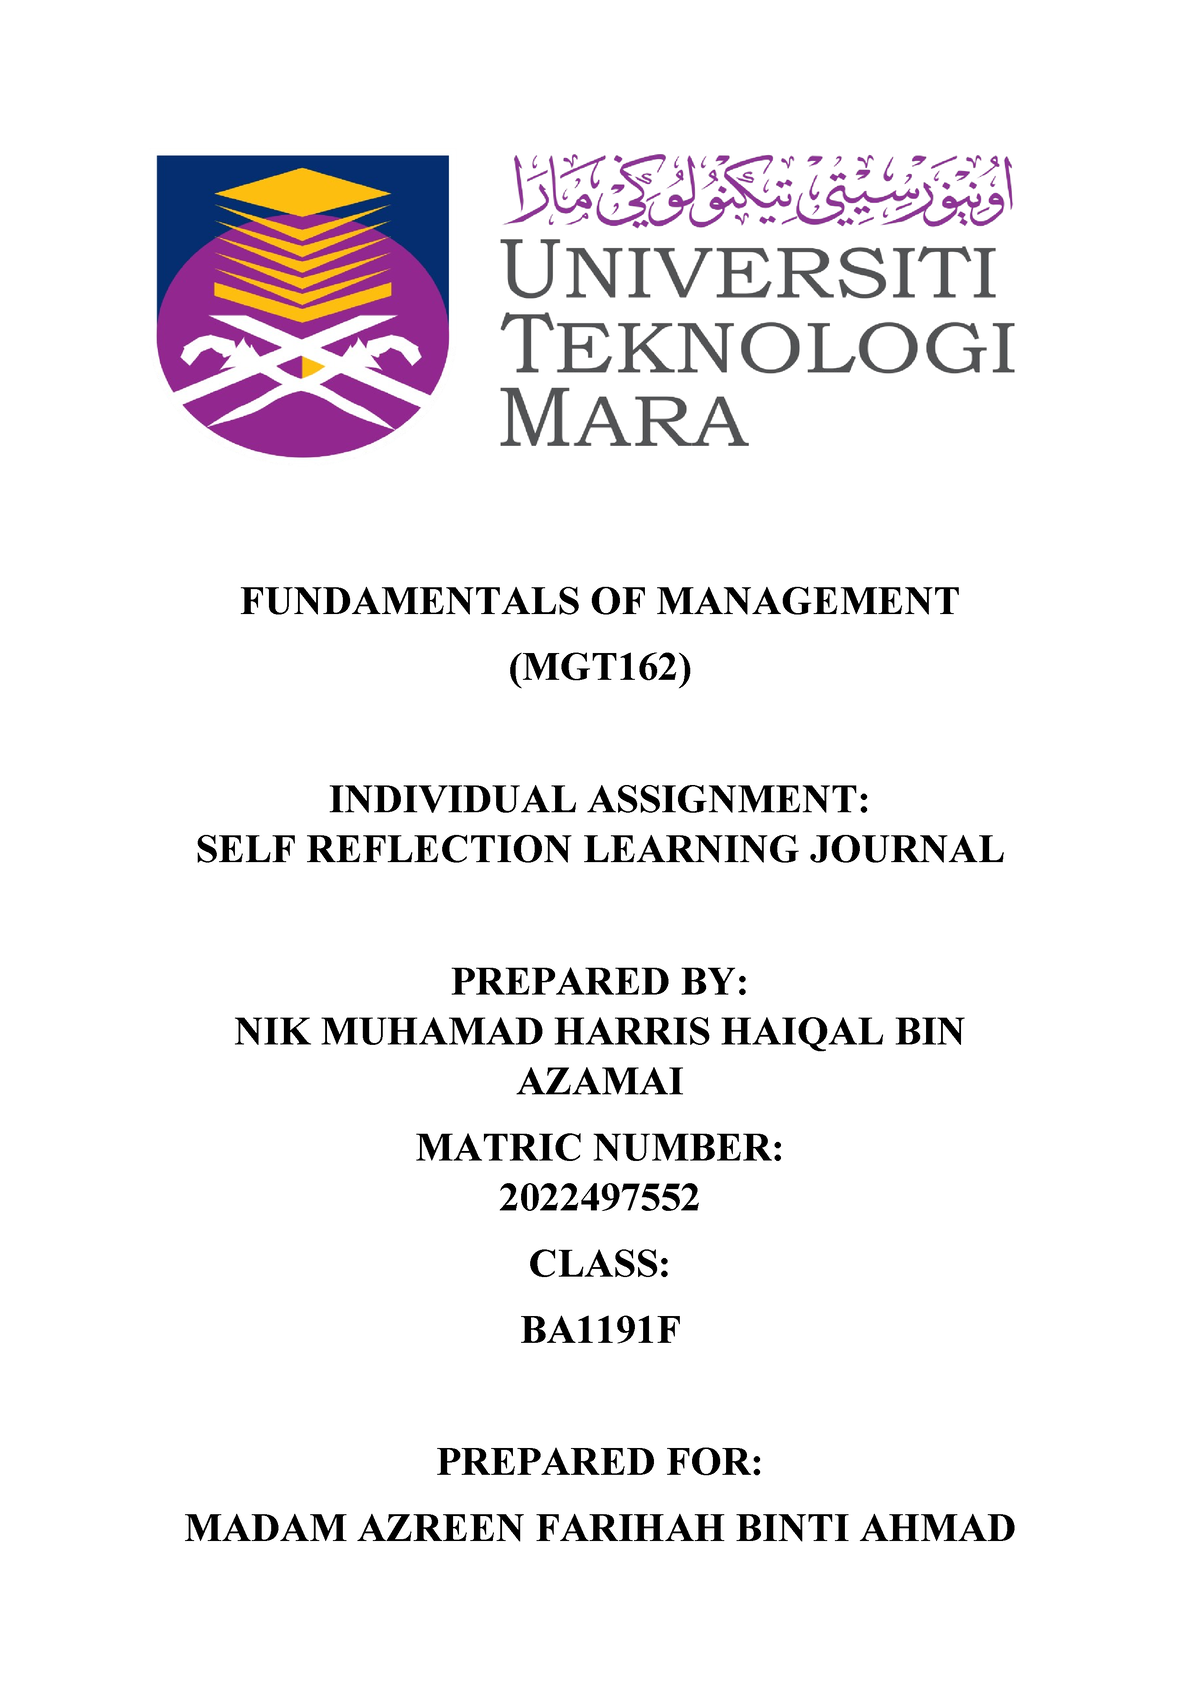 mgt162 individual assignment self reflection